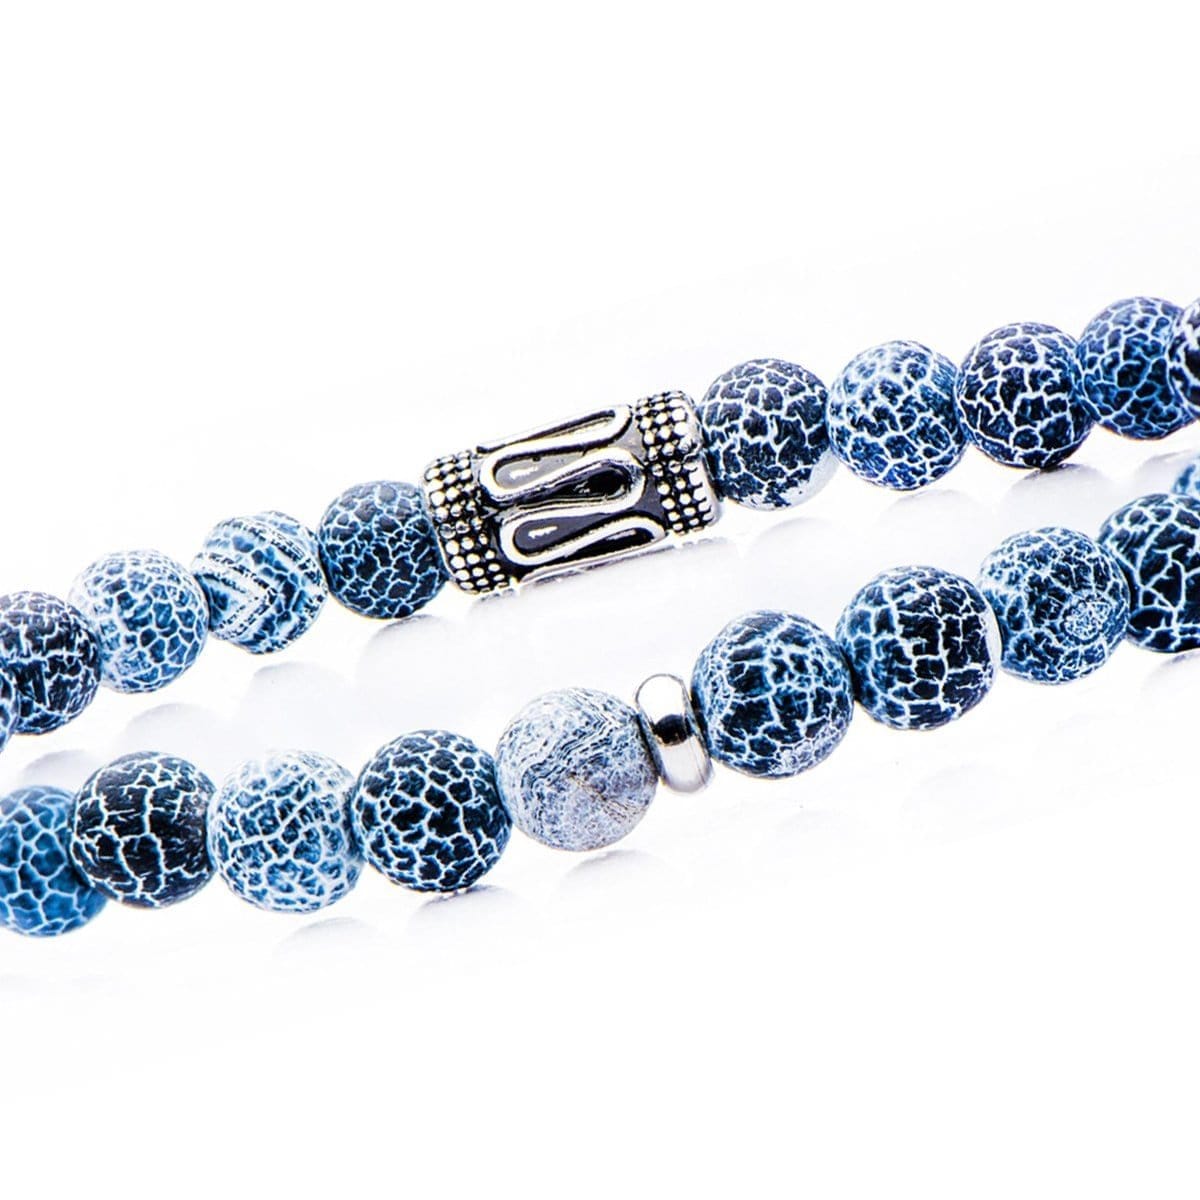 INOX JEWELRY Bracelets Silver Tone Stainless Steel with Blue Cracked Agate 6mm Bead Stackable Bracelet BRSS8415K